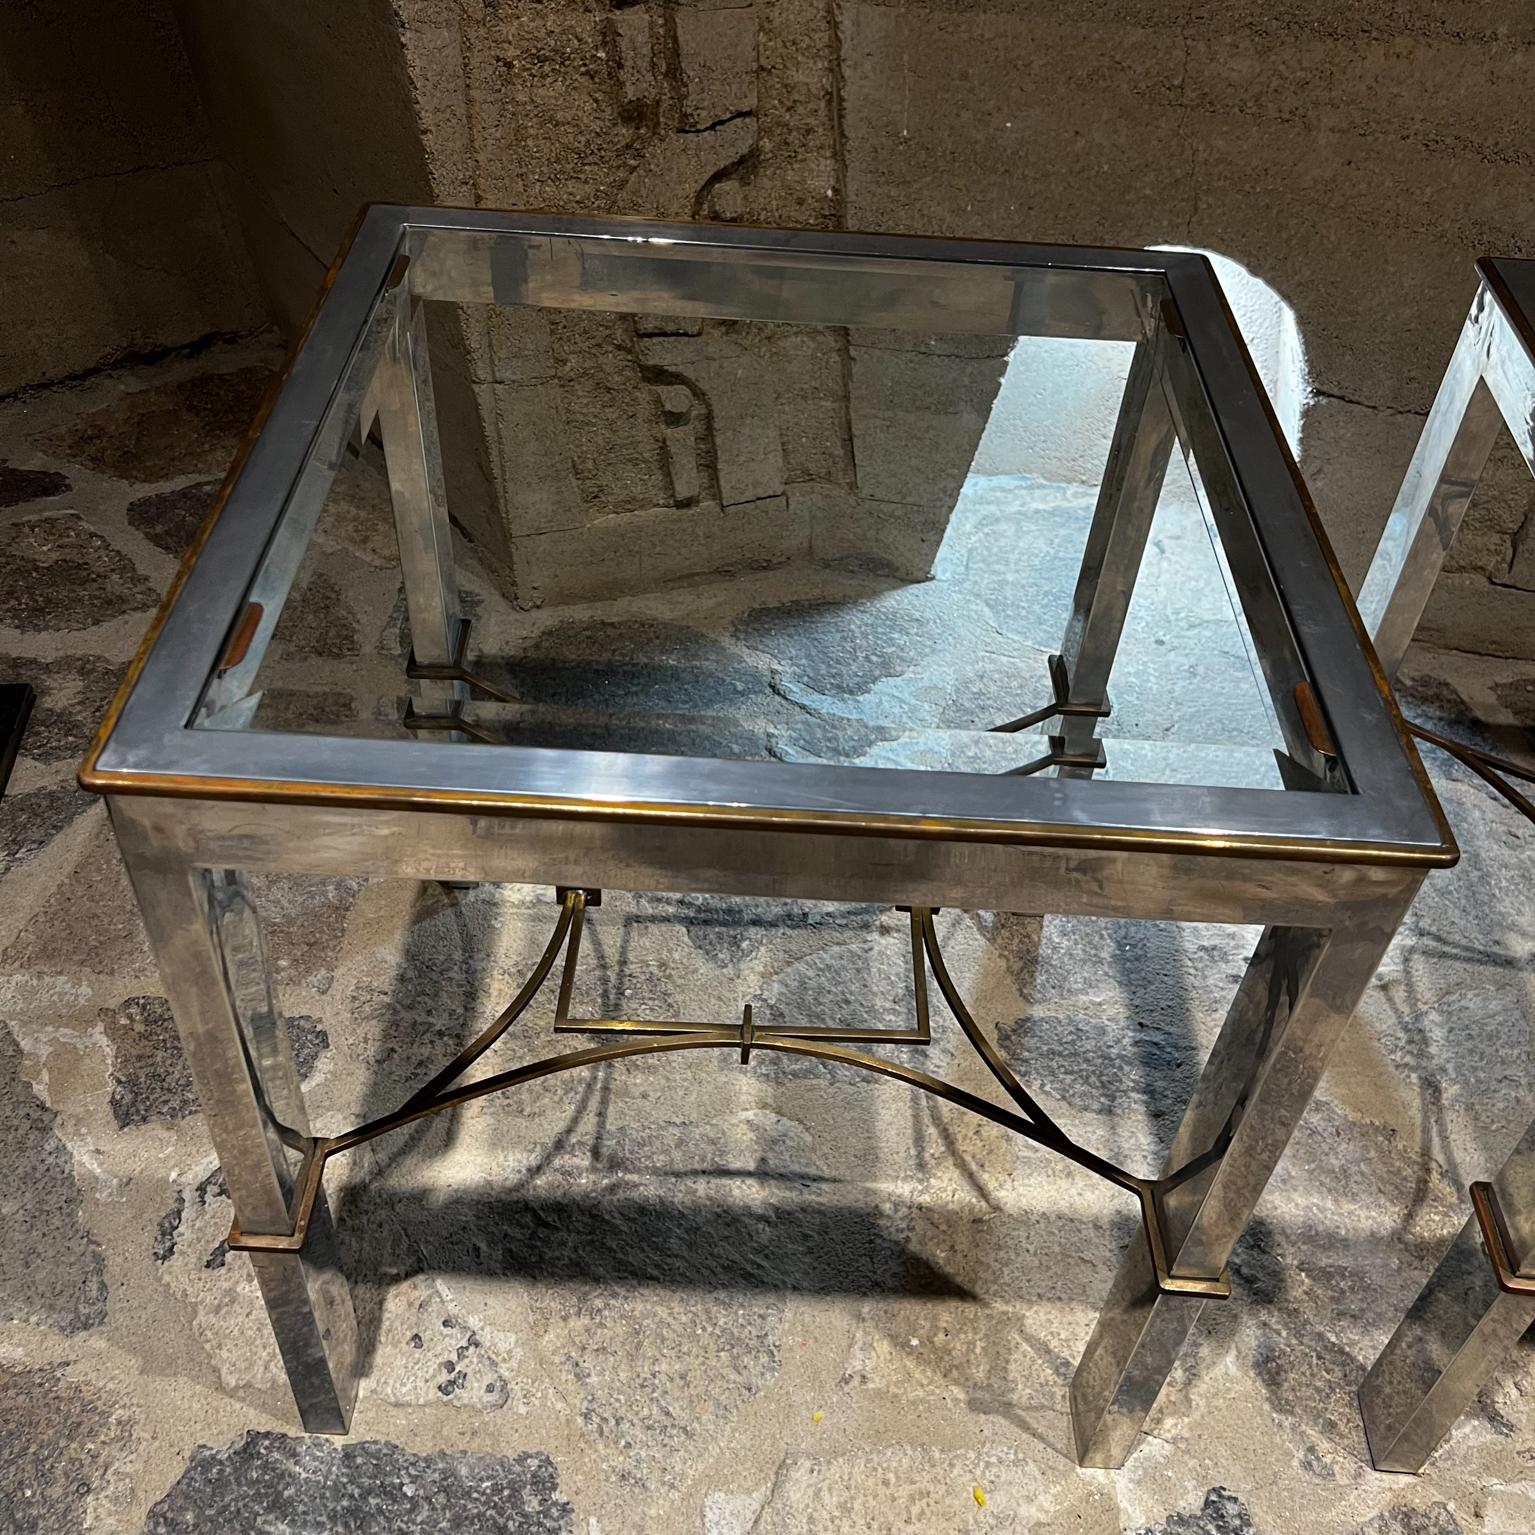 1960s Arturo Pani Modern Side Tables Aluminum and Bronze Mexico City For Sale 1